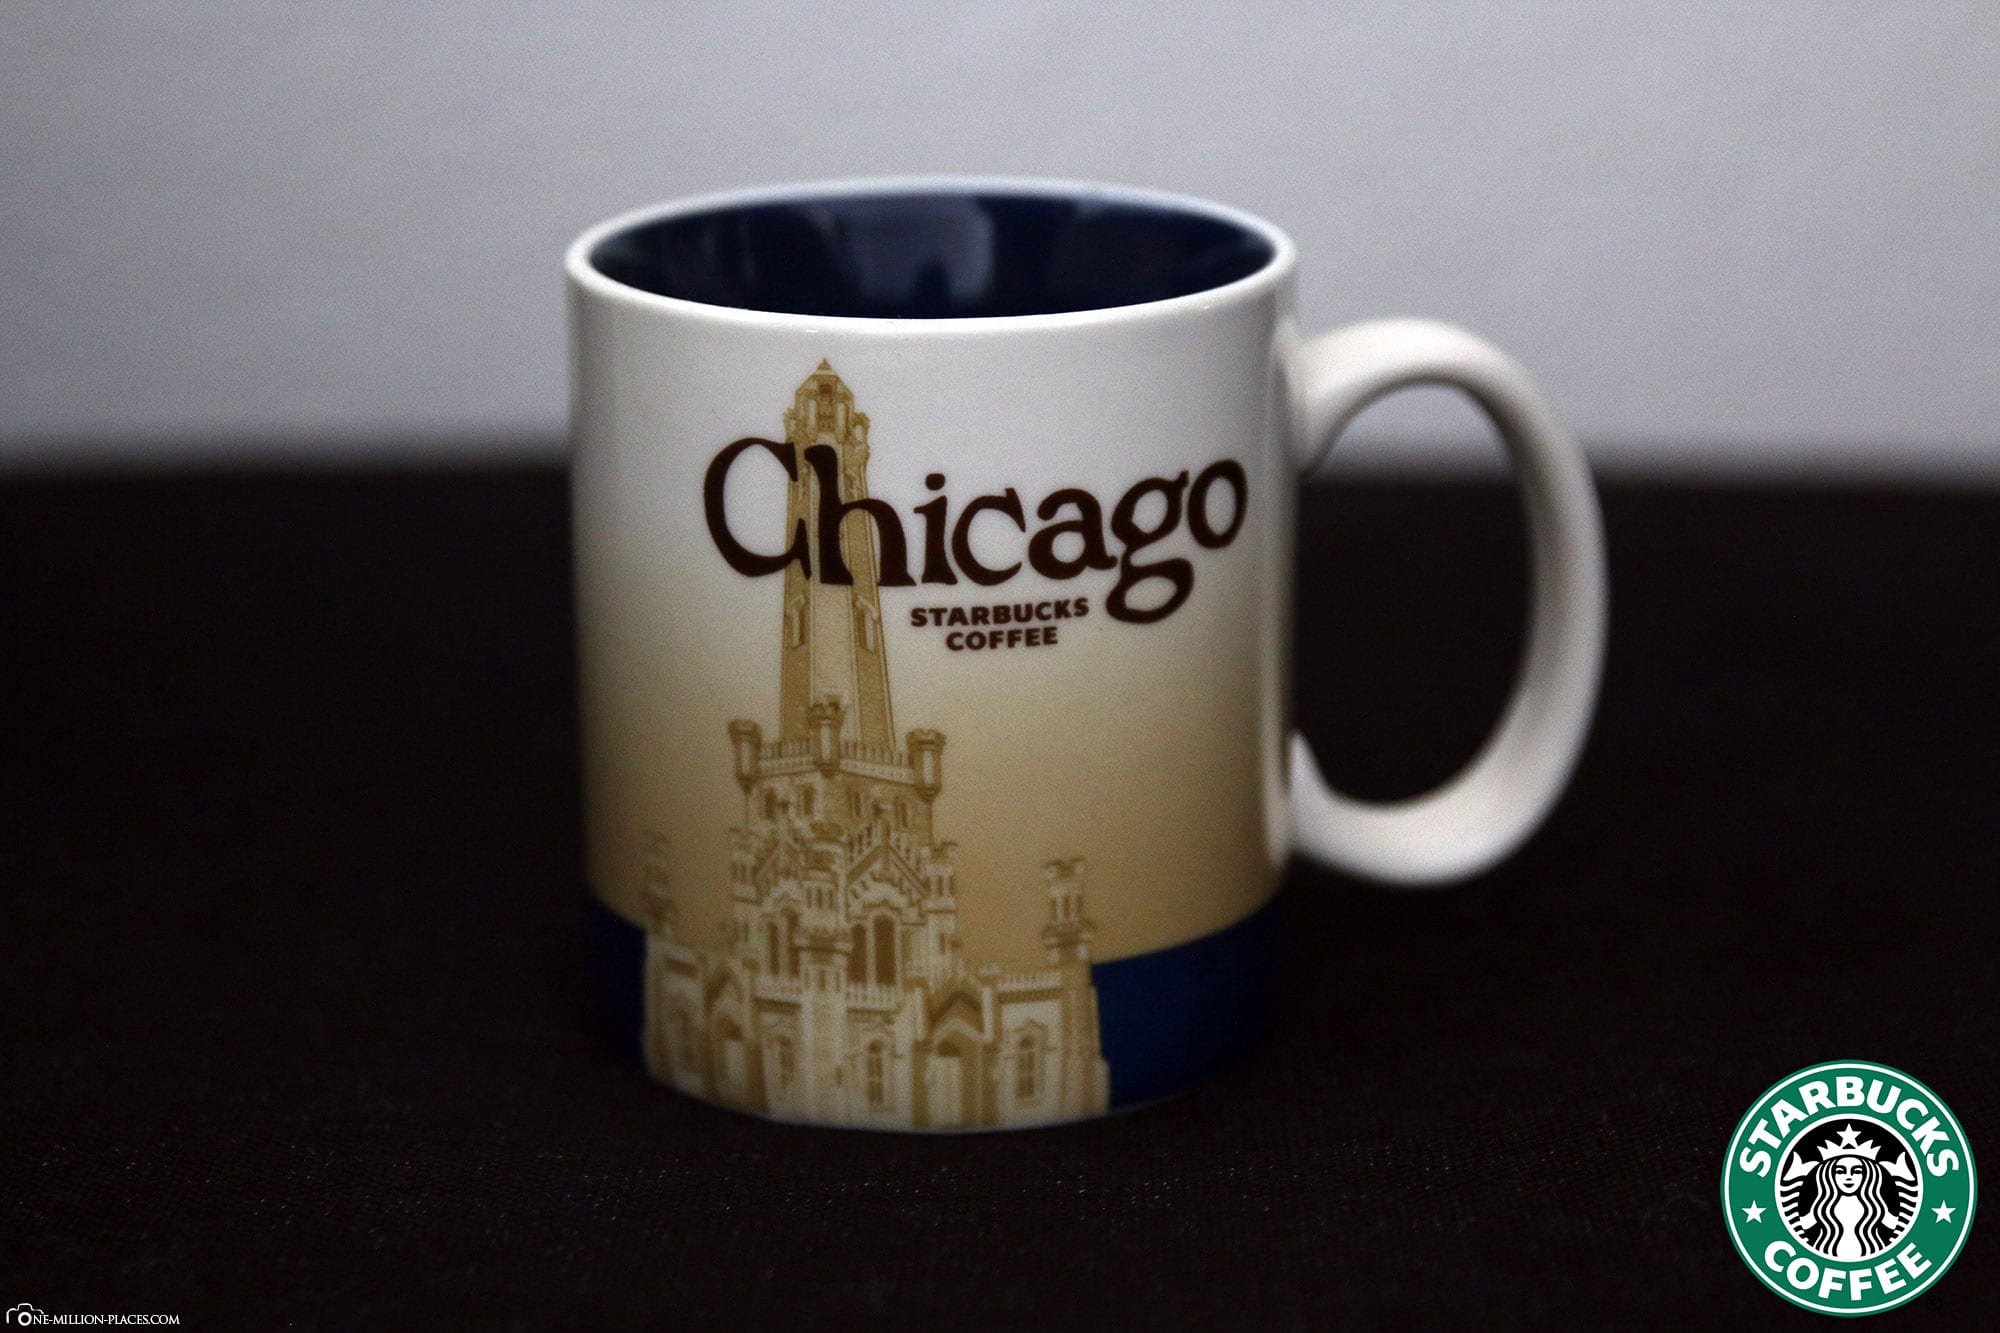 Chicago, Starbucks Cup, Global Icon Series, City Mugs, Collection, USA, Travelreport